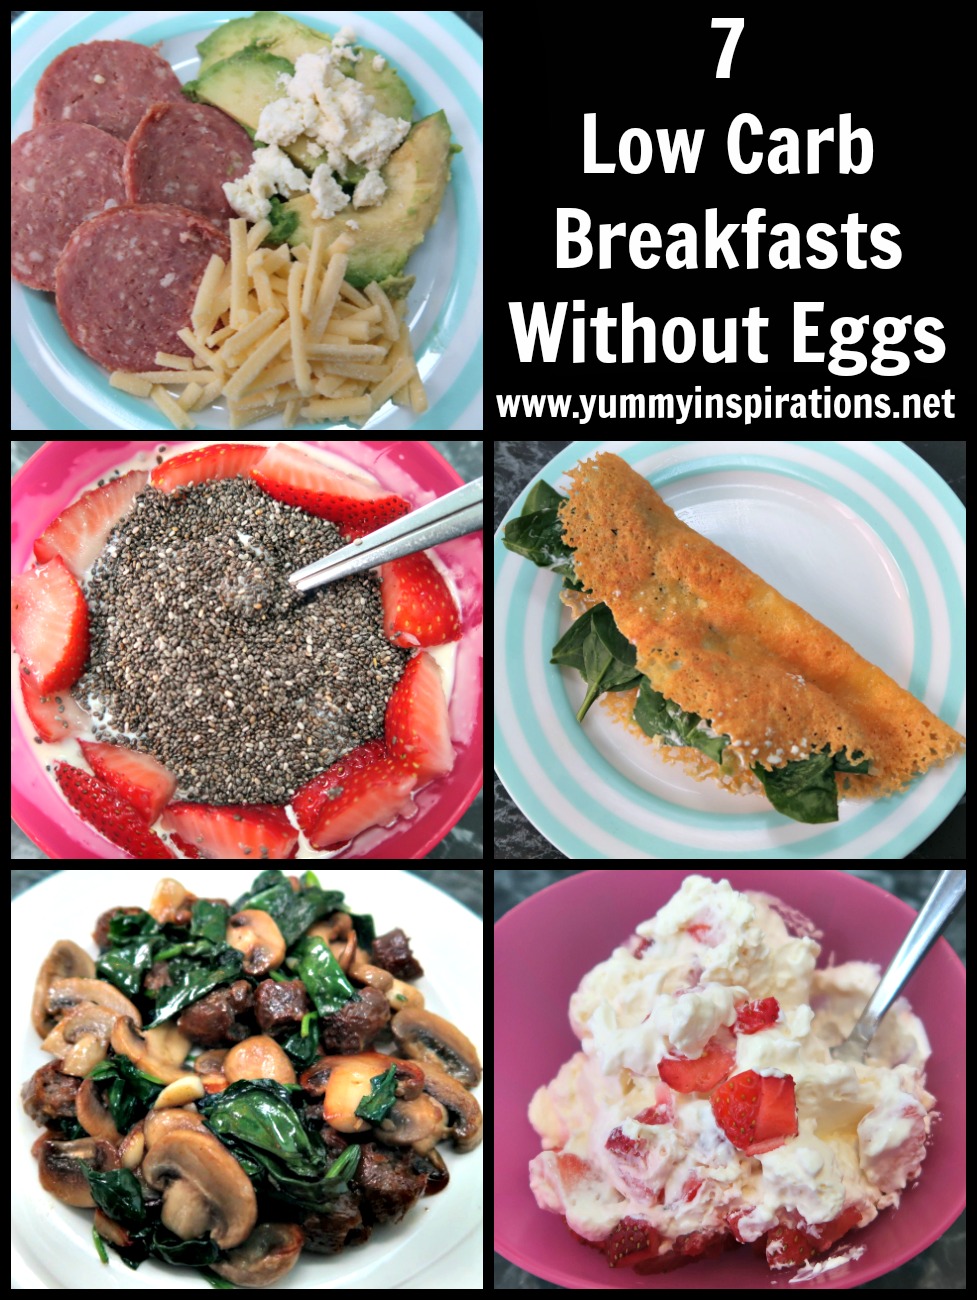 7 Low Carb Breakfast Without Eggs Ideas - Easy Keto Breakfasts With No Eggs - Eggless Ketosis Breakfast Recipes Other Than Eggs.